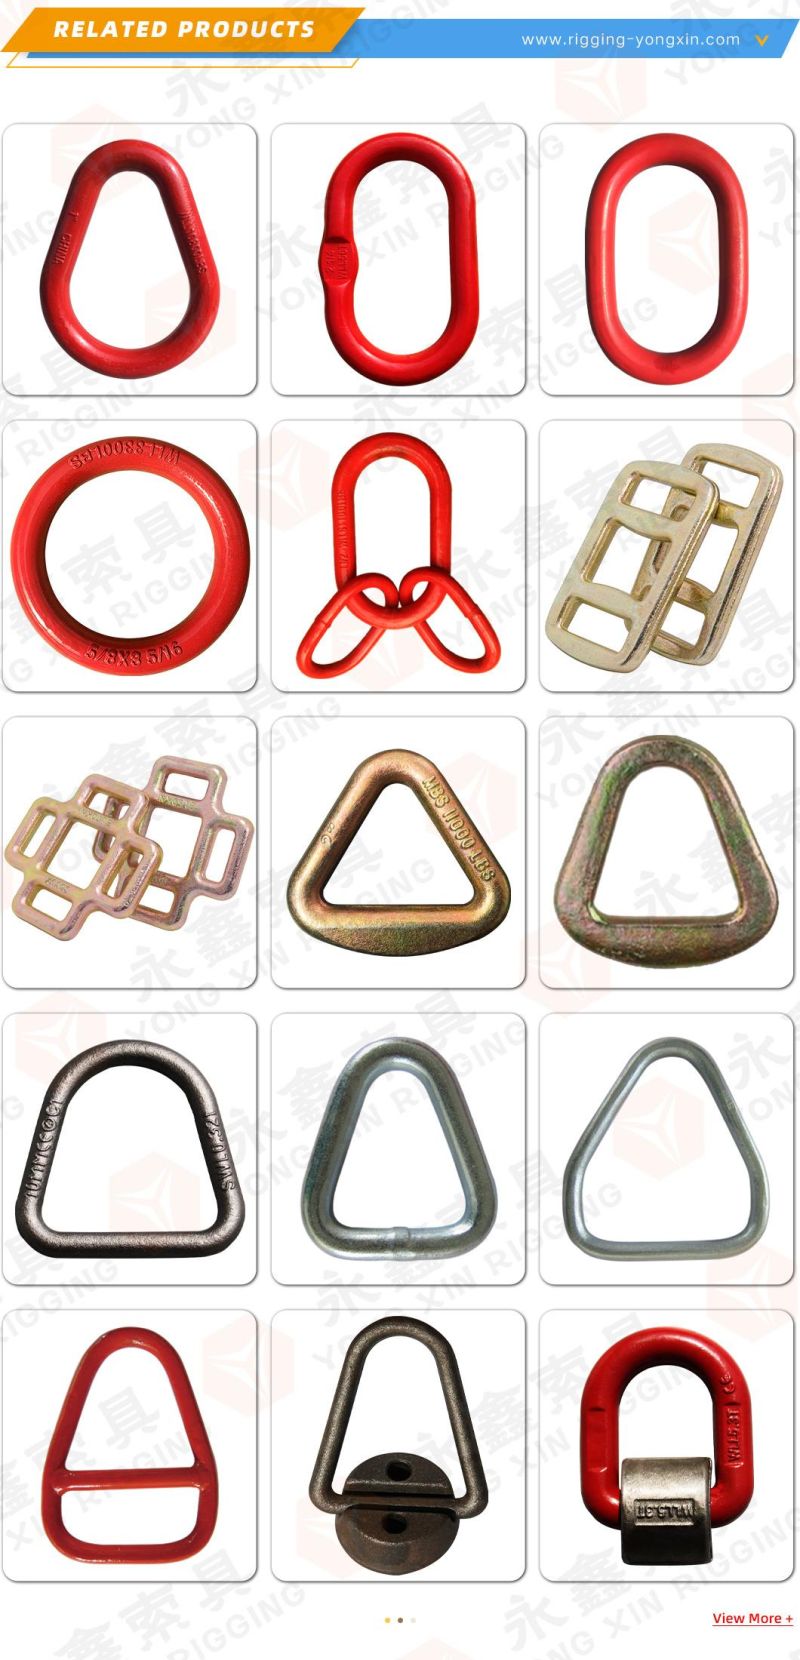 Qingdao Factory Direct Made in China Manufacture Quality Forged Lashing Buckle